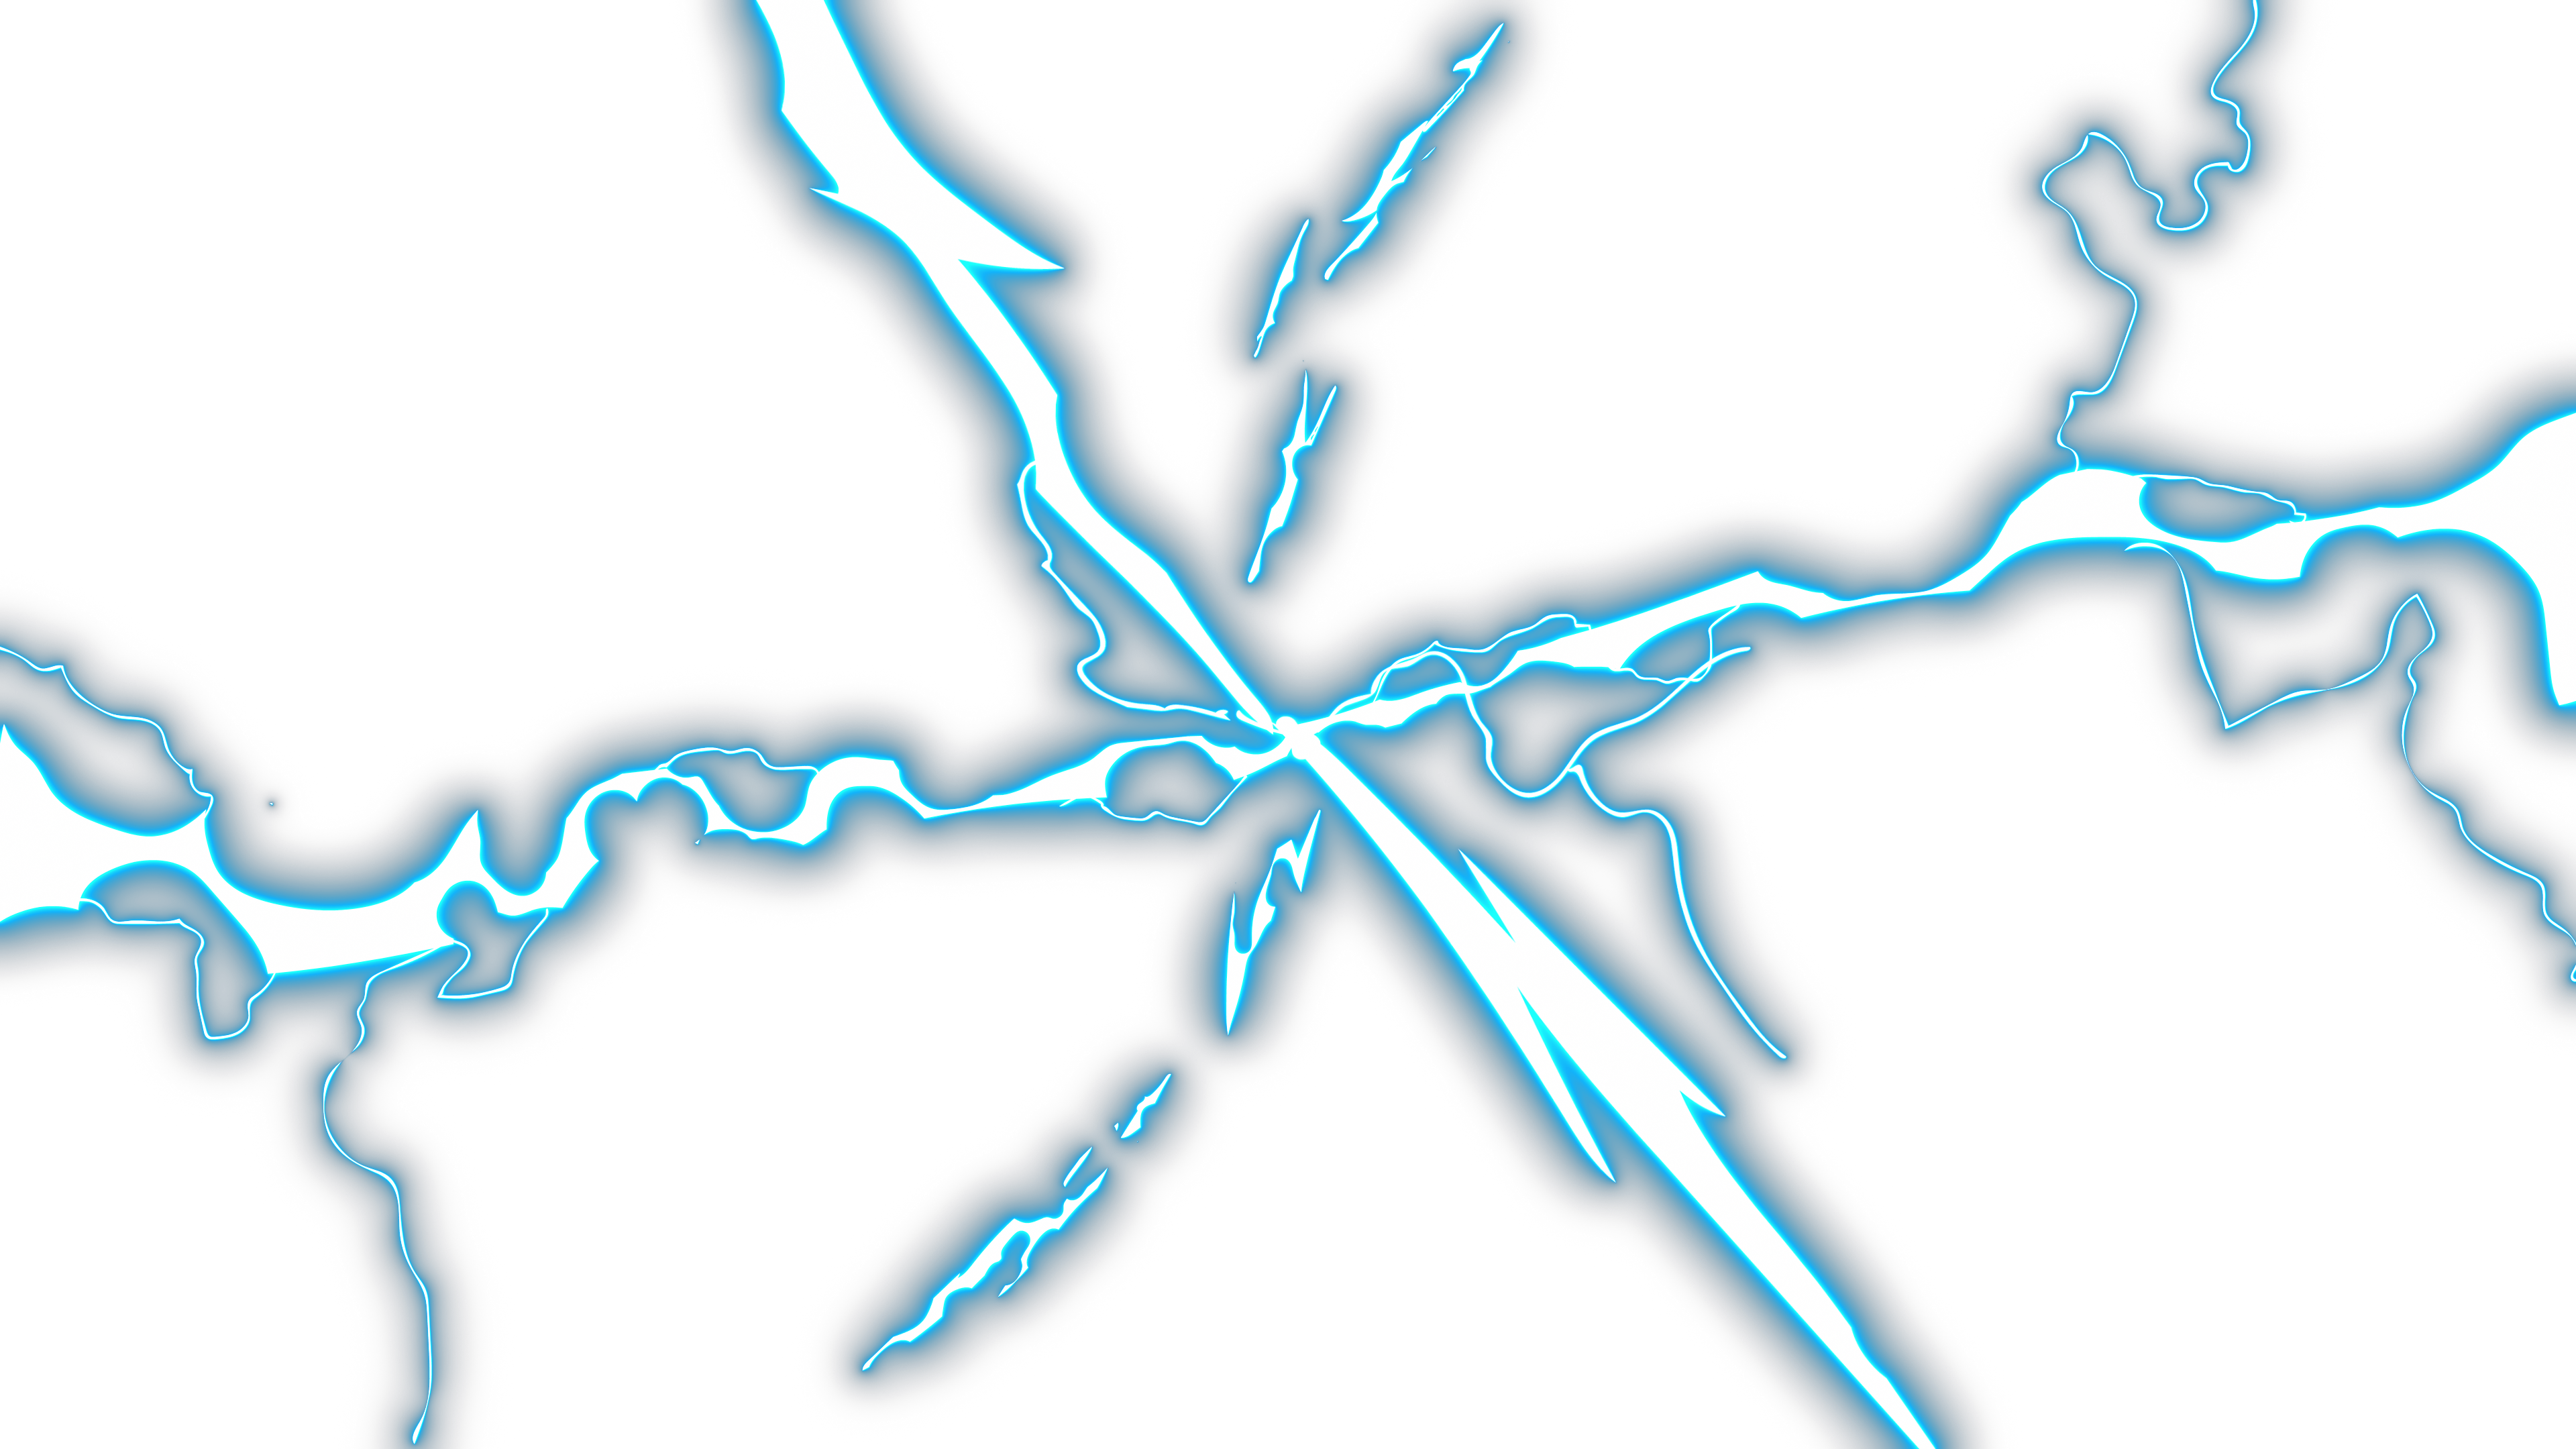 Anime Lightning Blast Effect FootageCrate Free FX Archives, 57% OFF